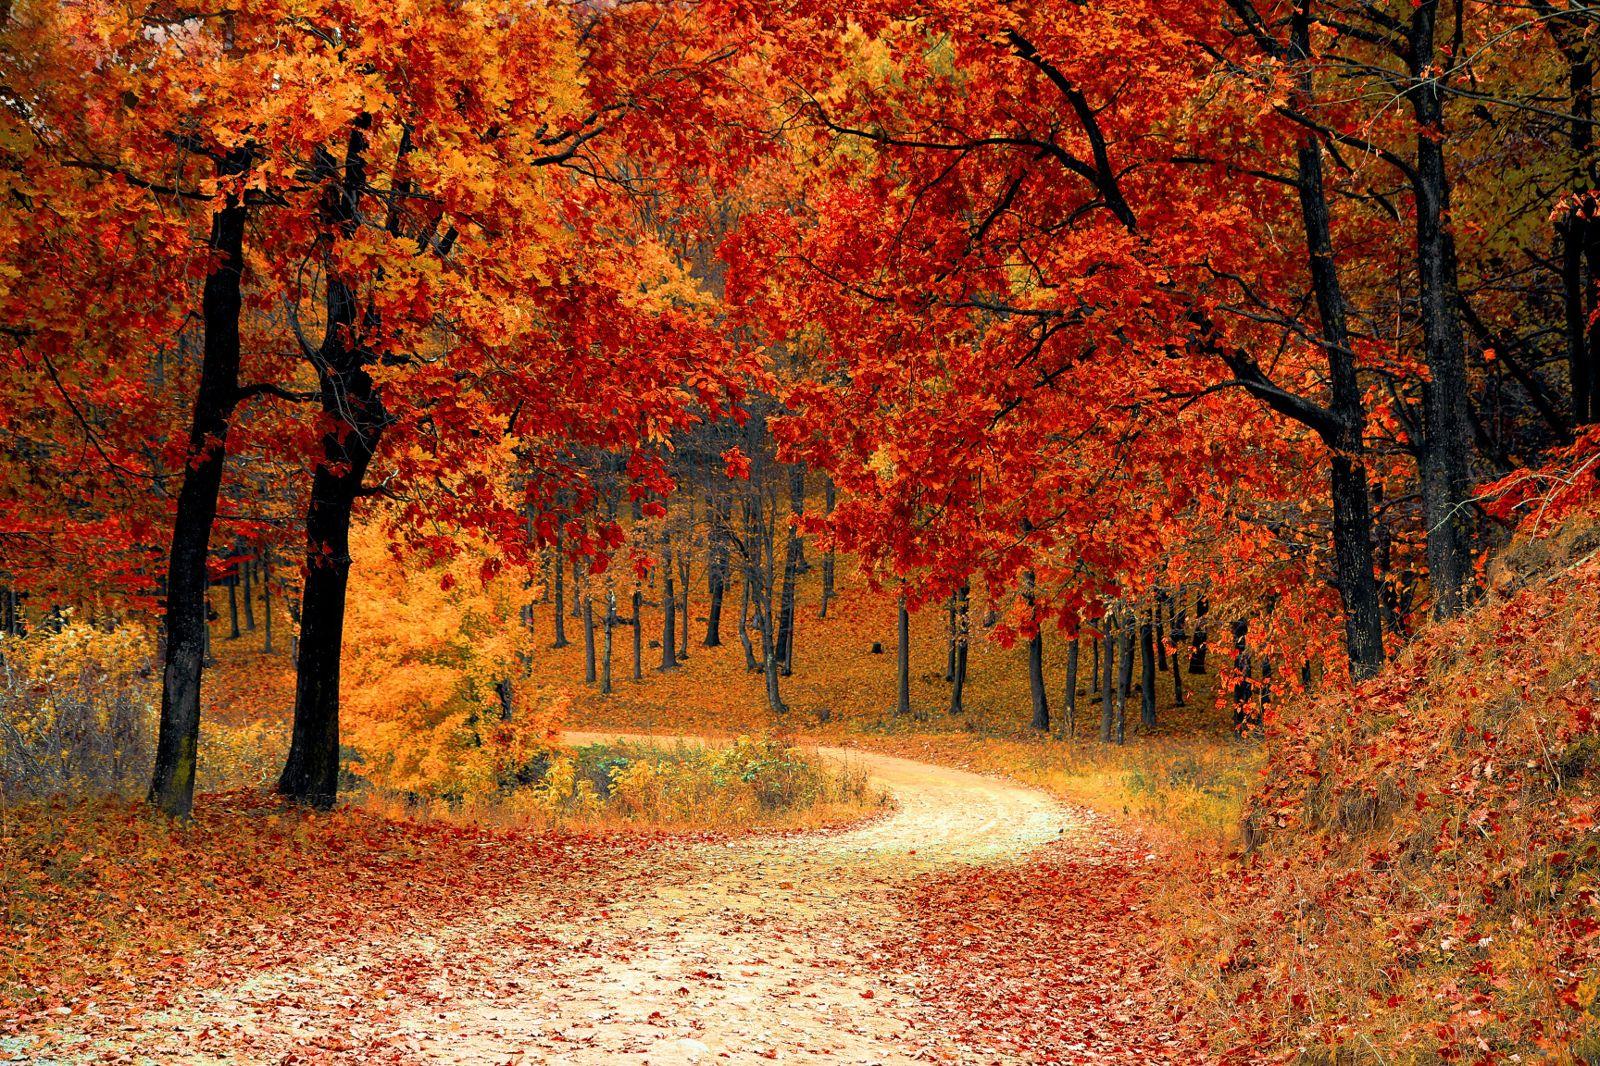 Nature Trees Forest Road Leaves Colorful HD Wallpaper Colourful Woods Autumn Fall Wallpaper.com. Best High Quality Wallpaper